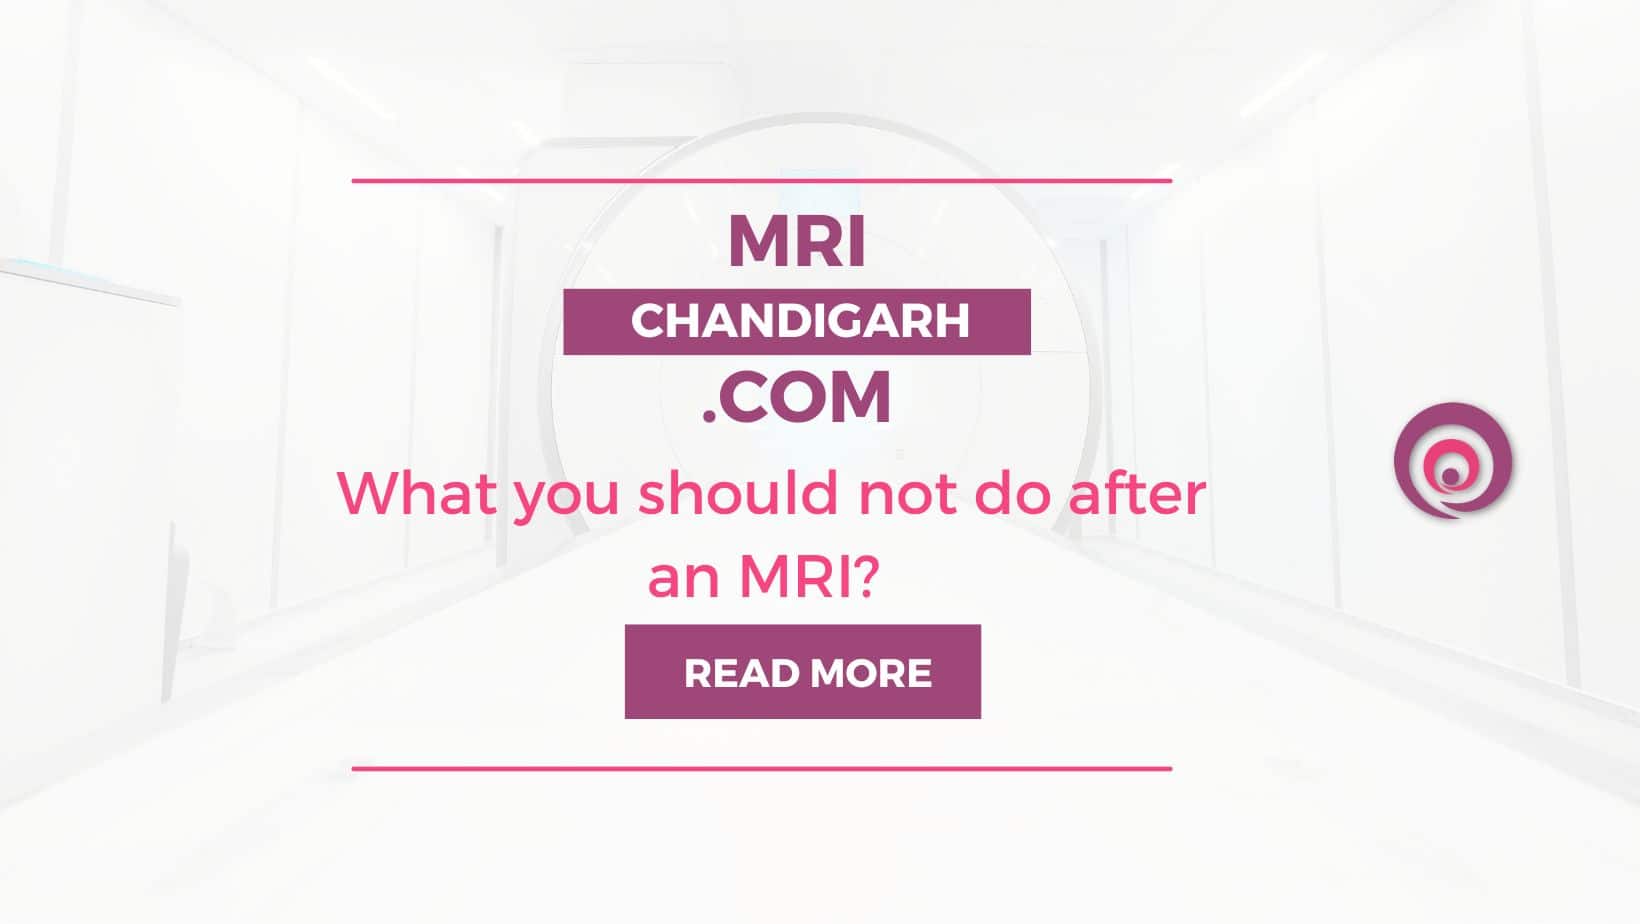 What you should not do after an MRI?